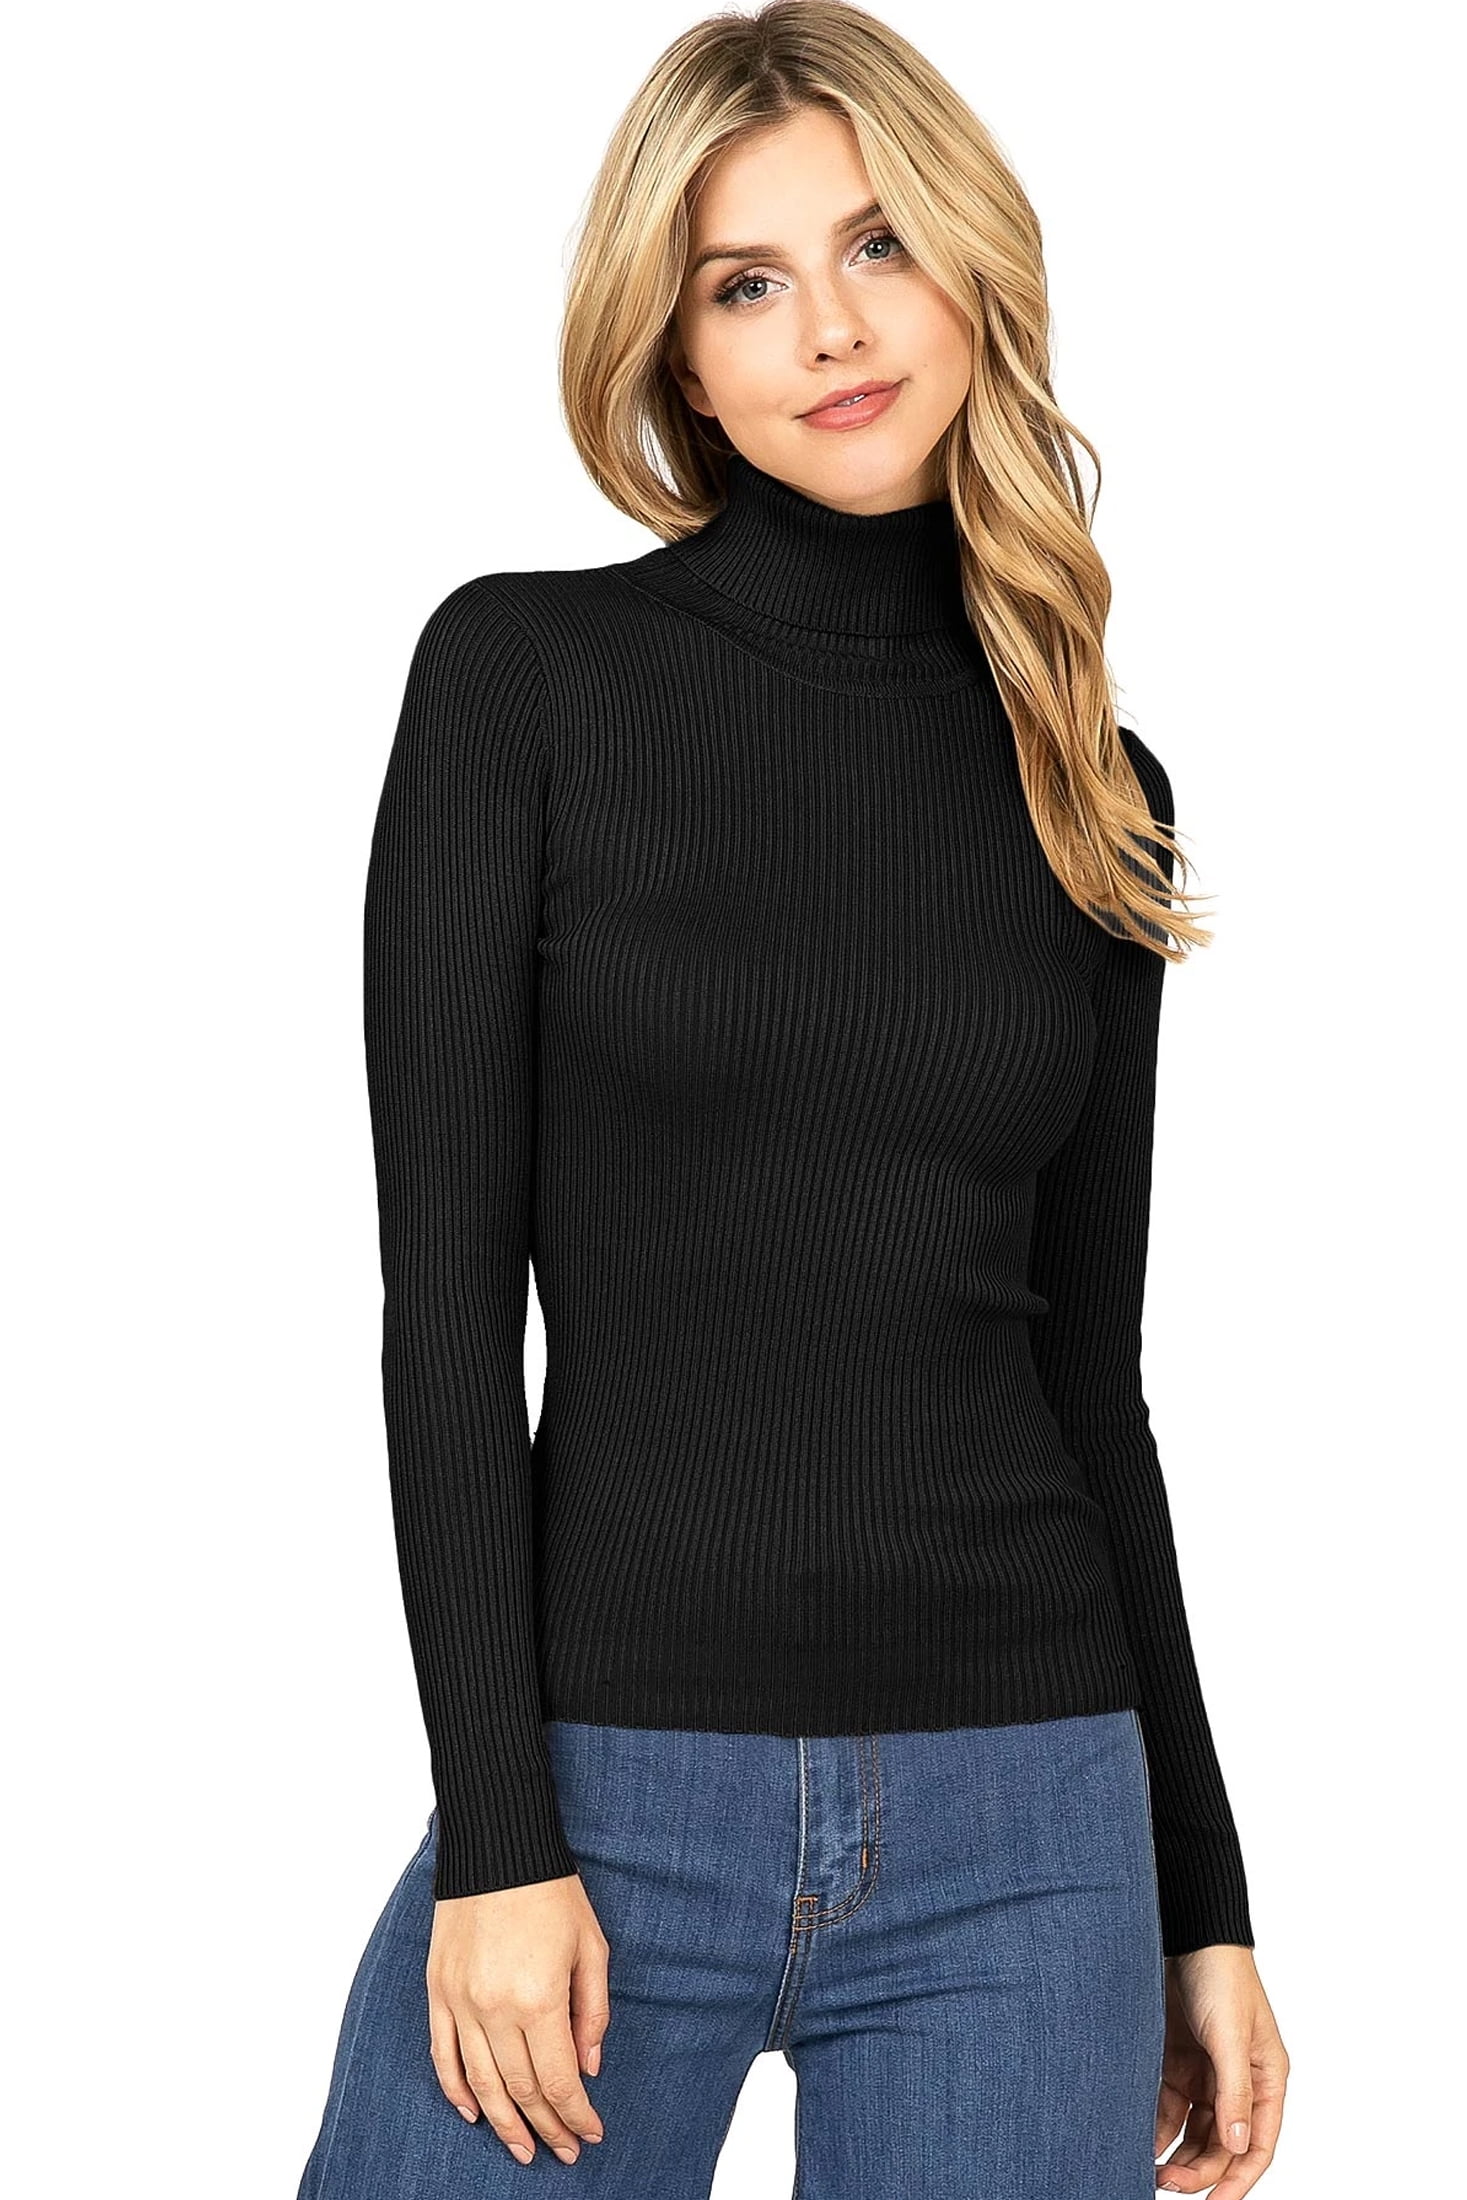 Ambiance Apparel Womens Stretchy Ribbed Long Sleeve Turtle Neck Top L Black